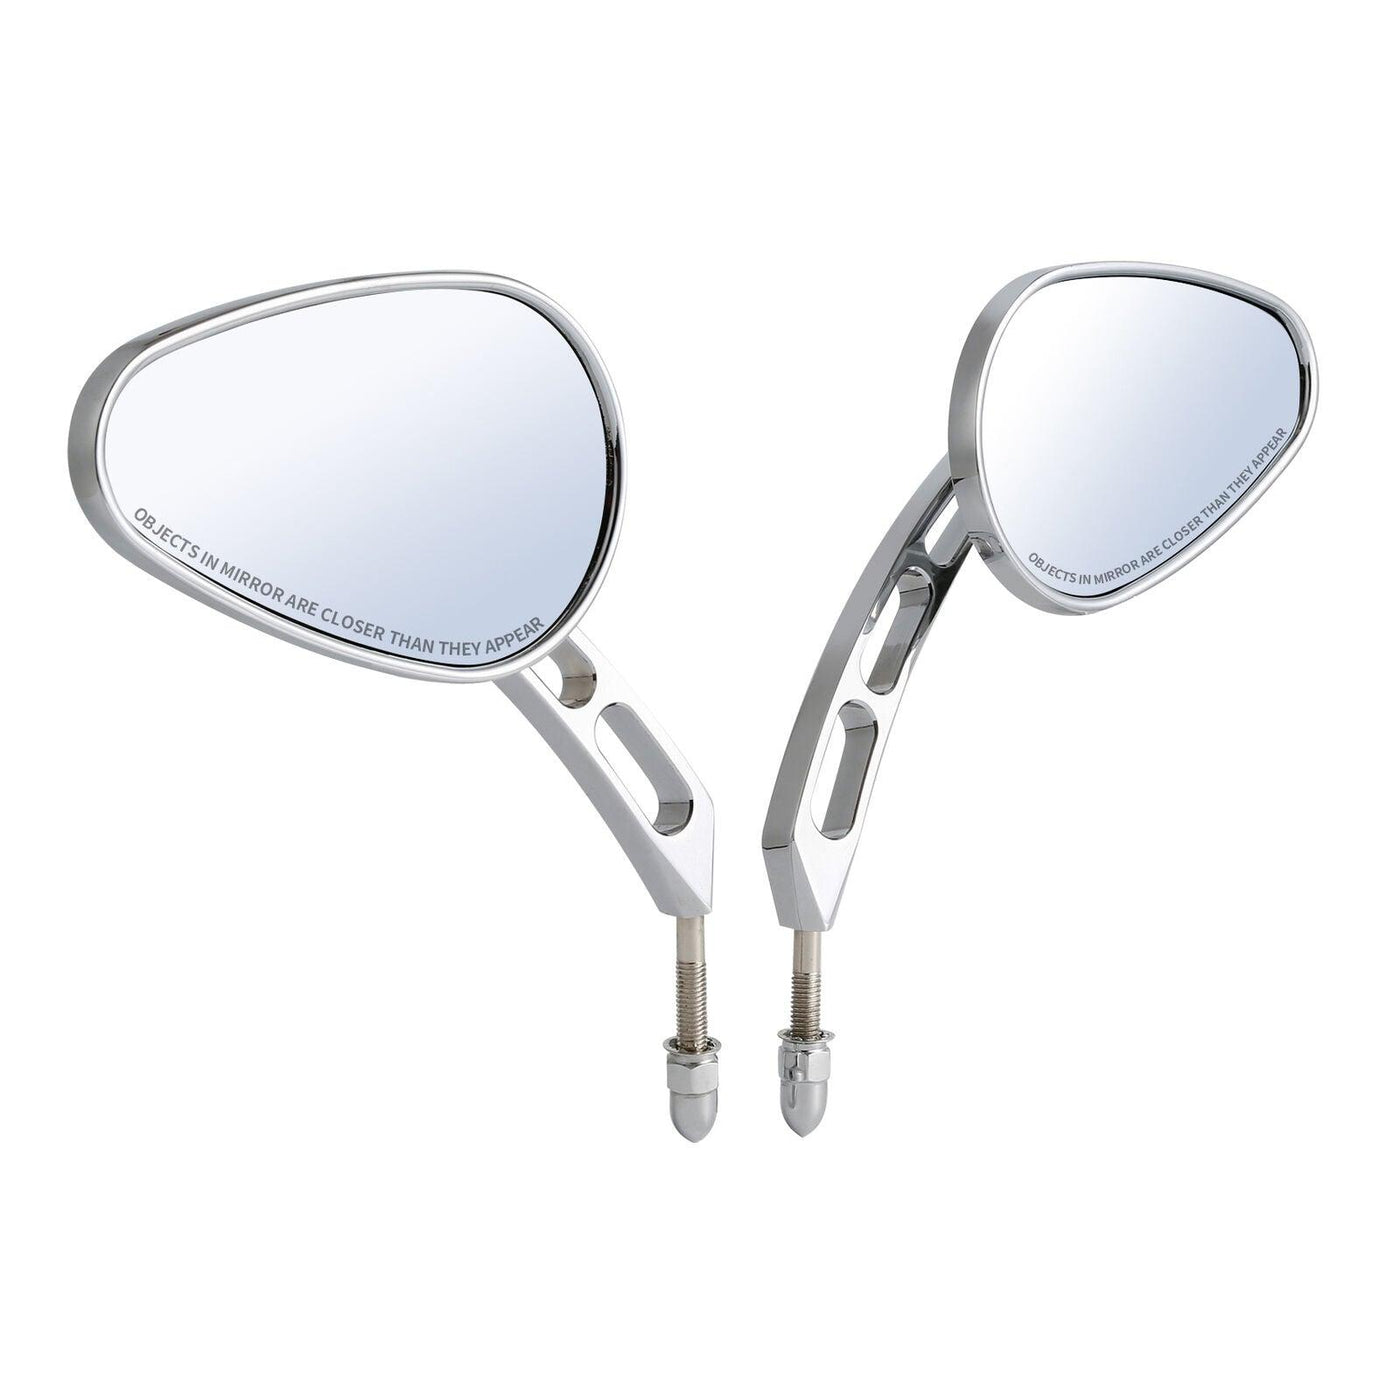 Chrome Rear-View Mirrors Fit For Harley Road Street Glide Sportster Dyna Softail - Moto Life Products